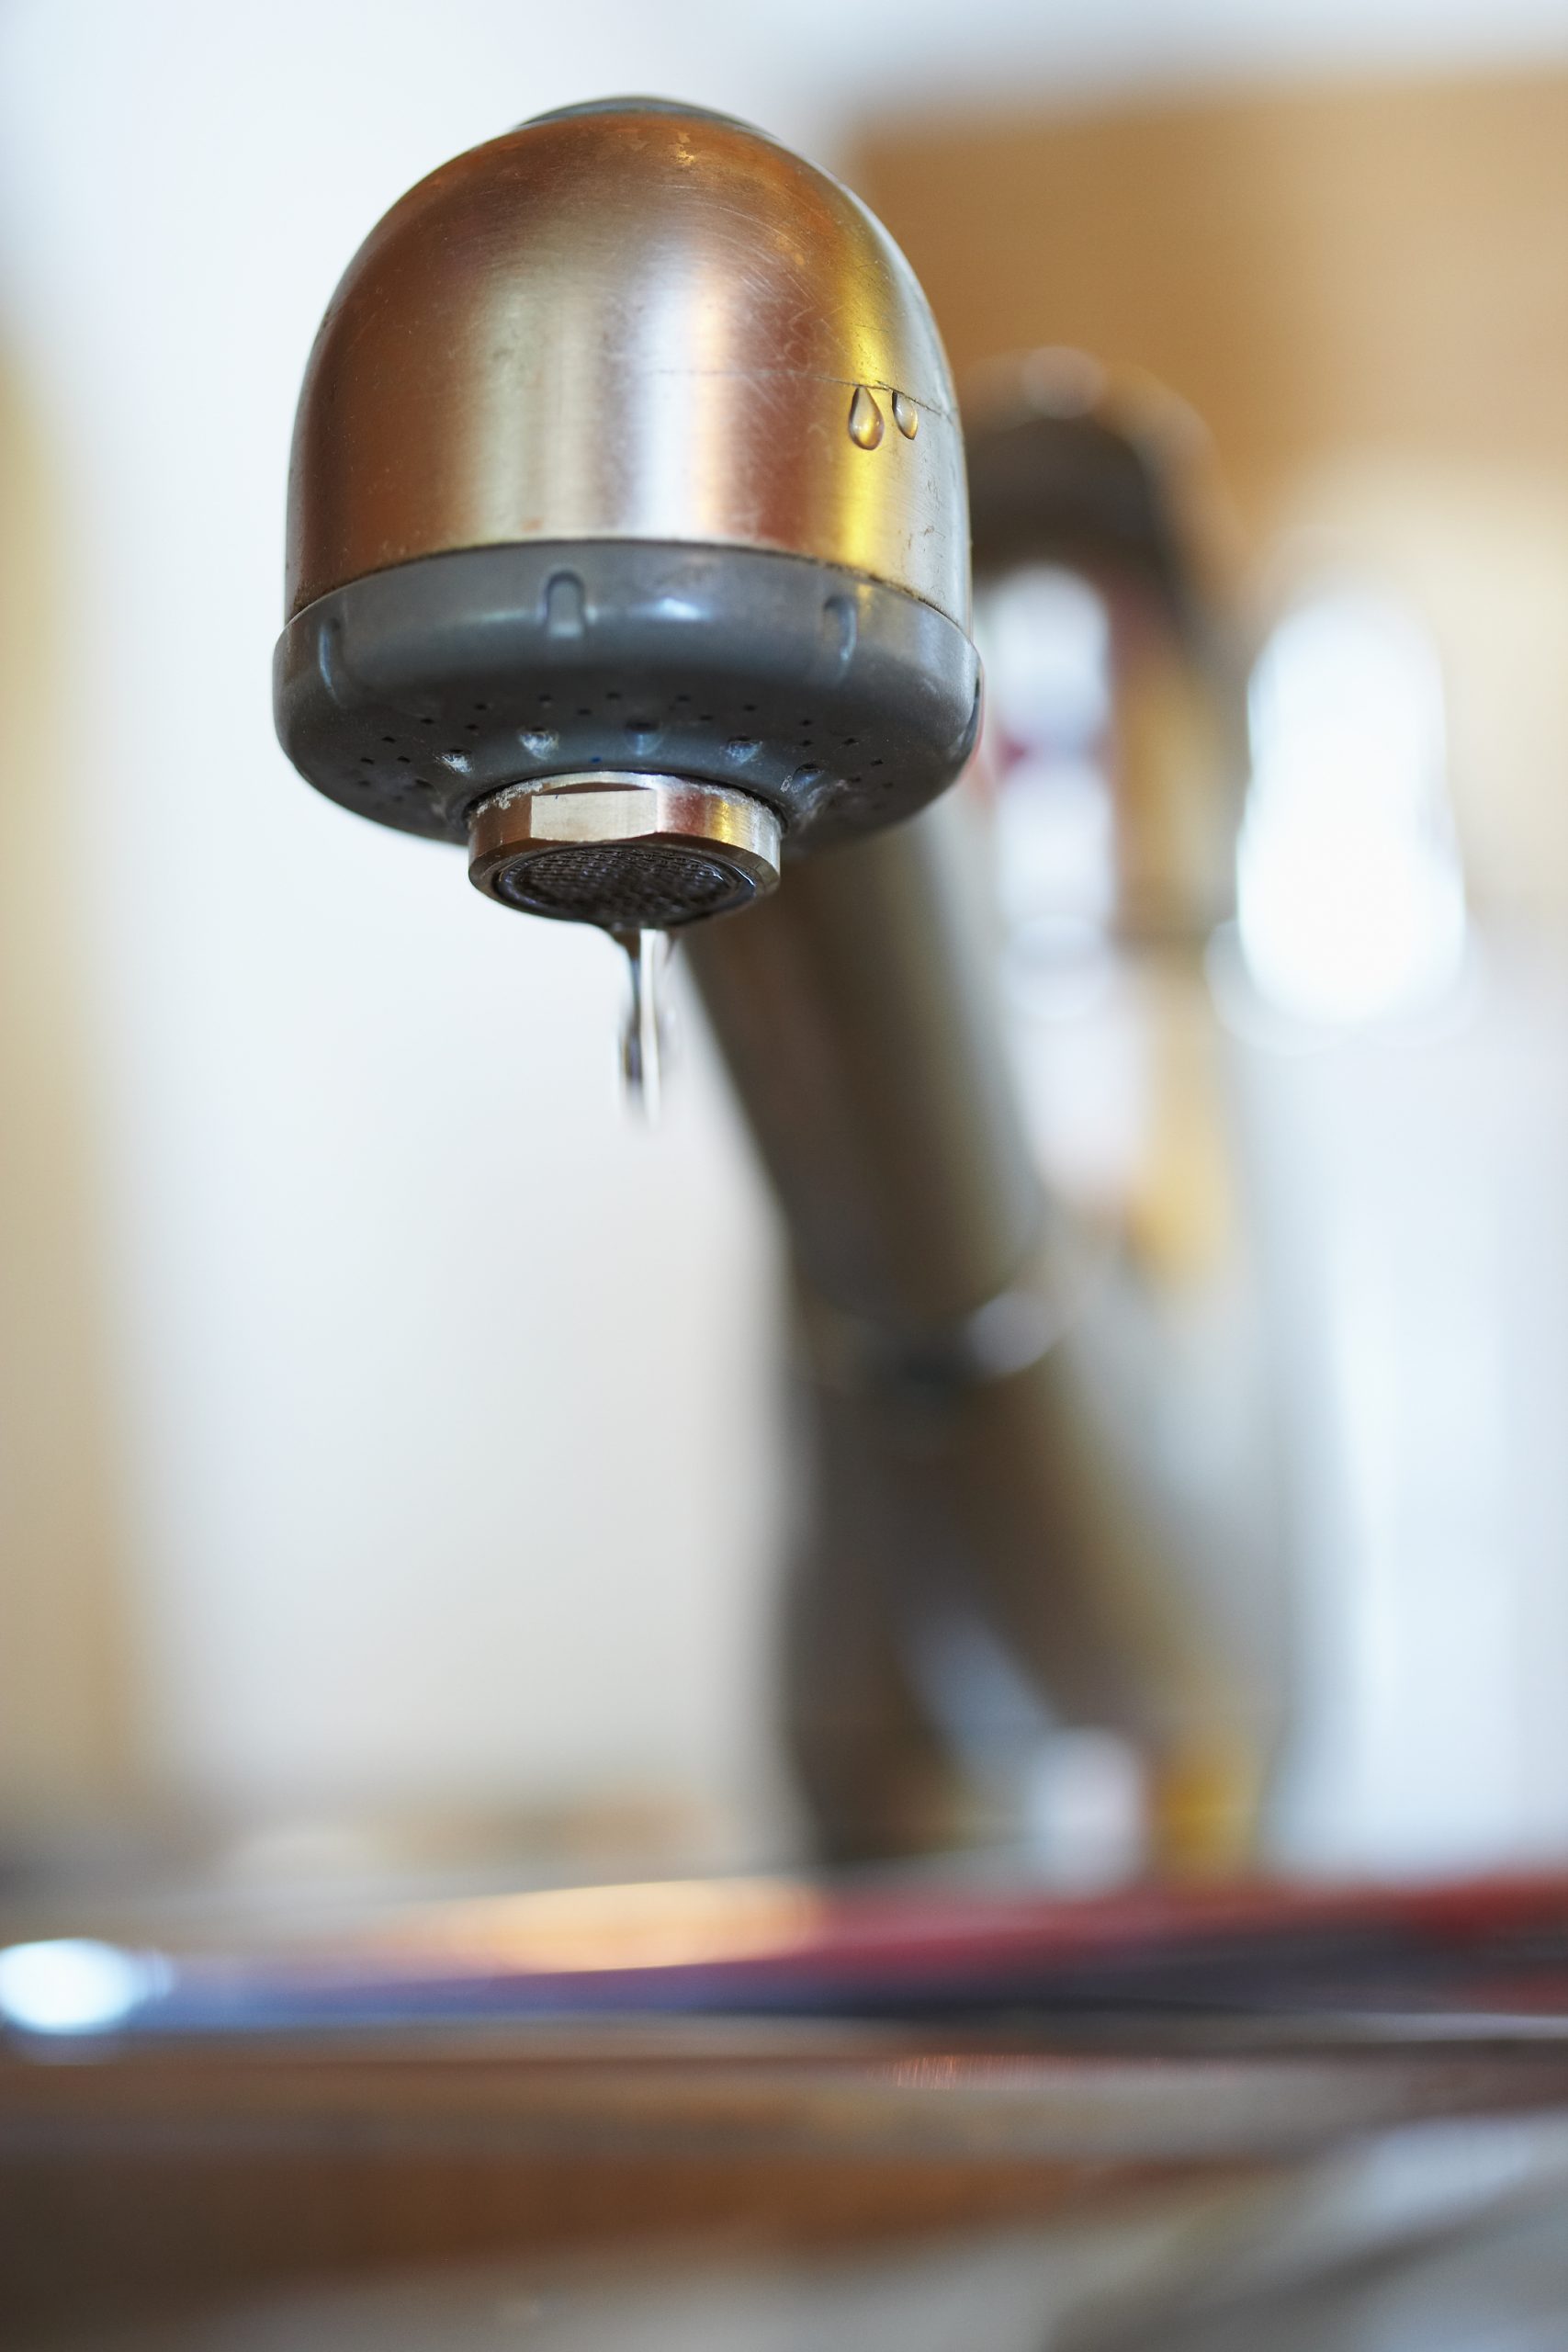 The Best American Standard Kitchen Faucets